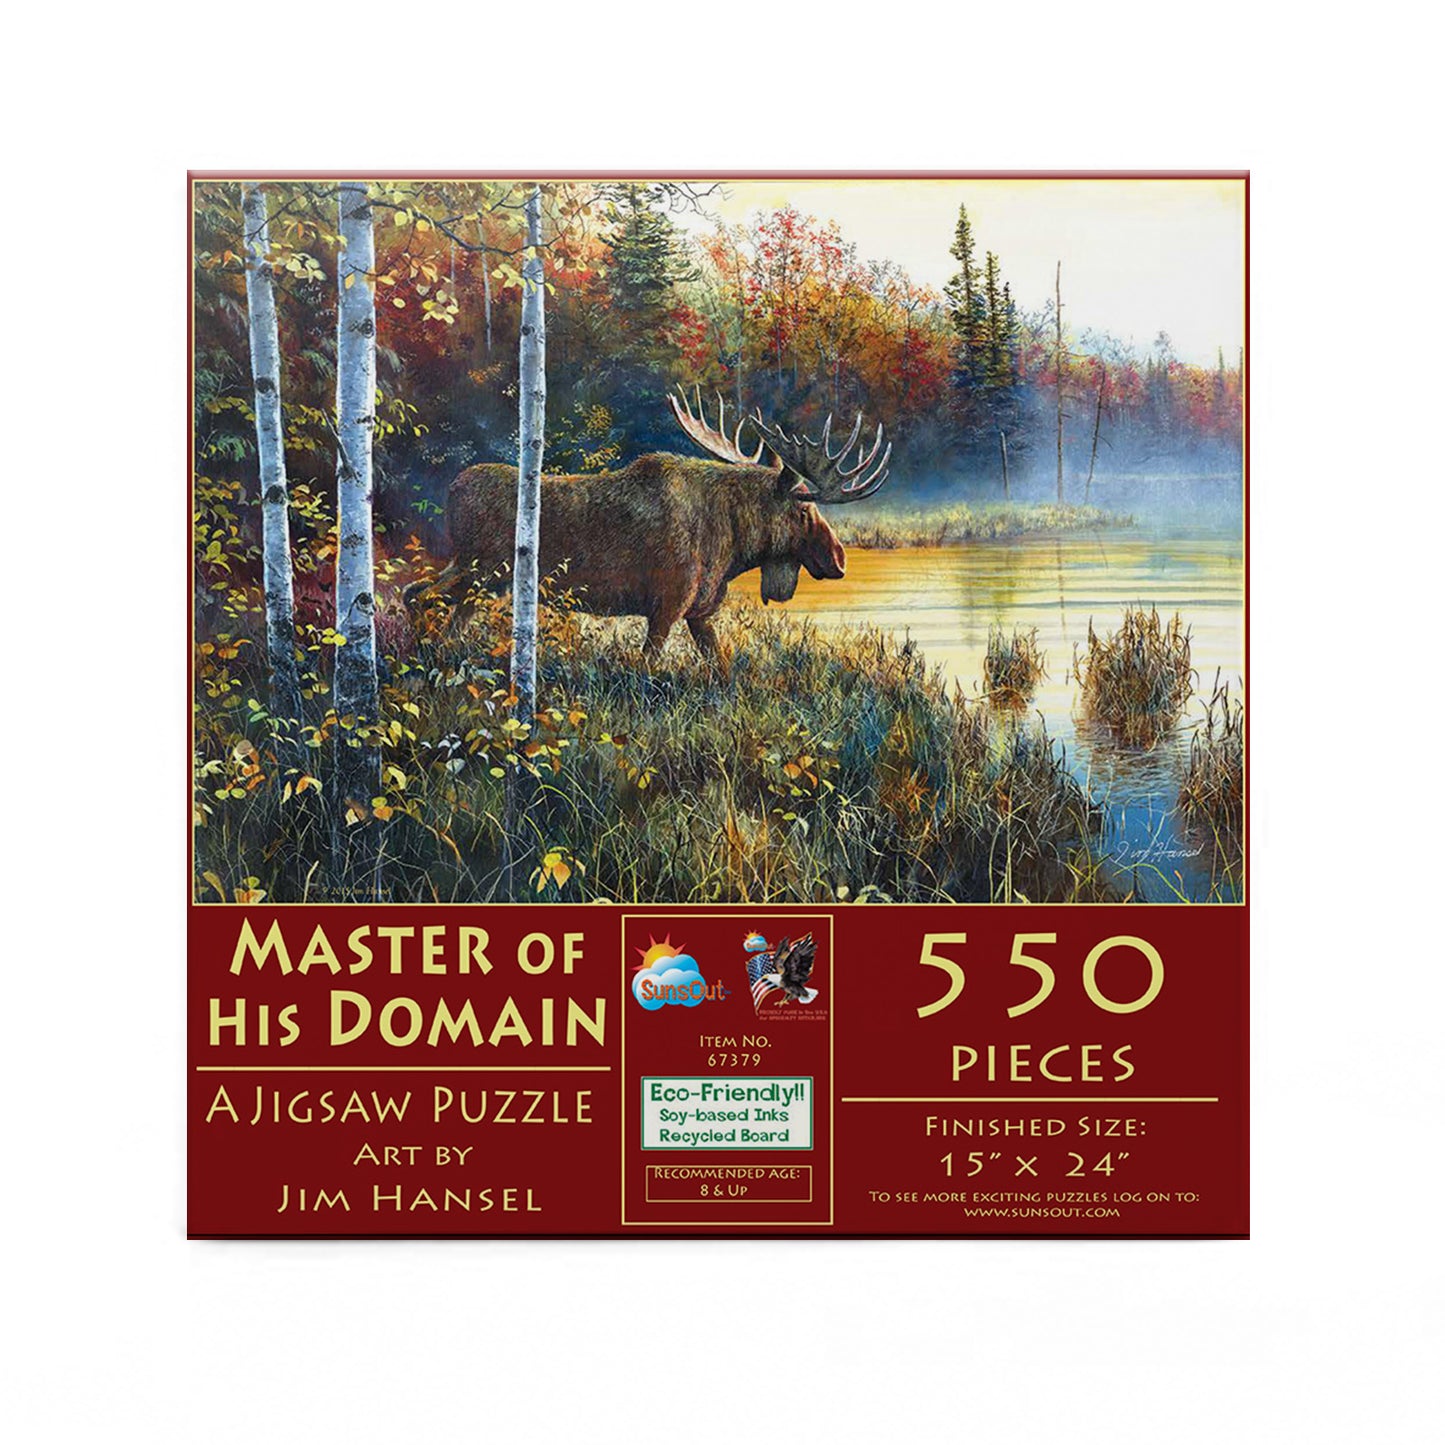 Master of His Domain - 550 Piece Jigsaw Puzzle